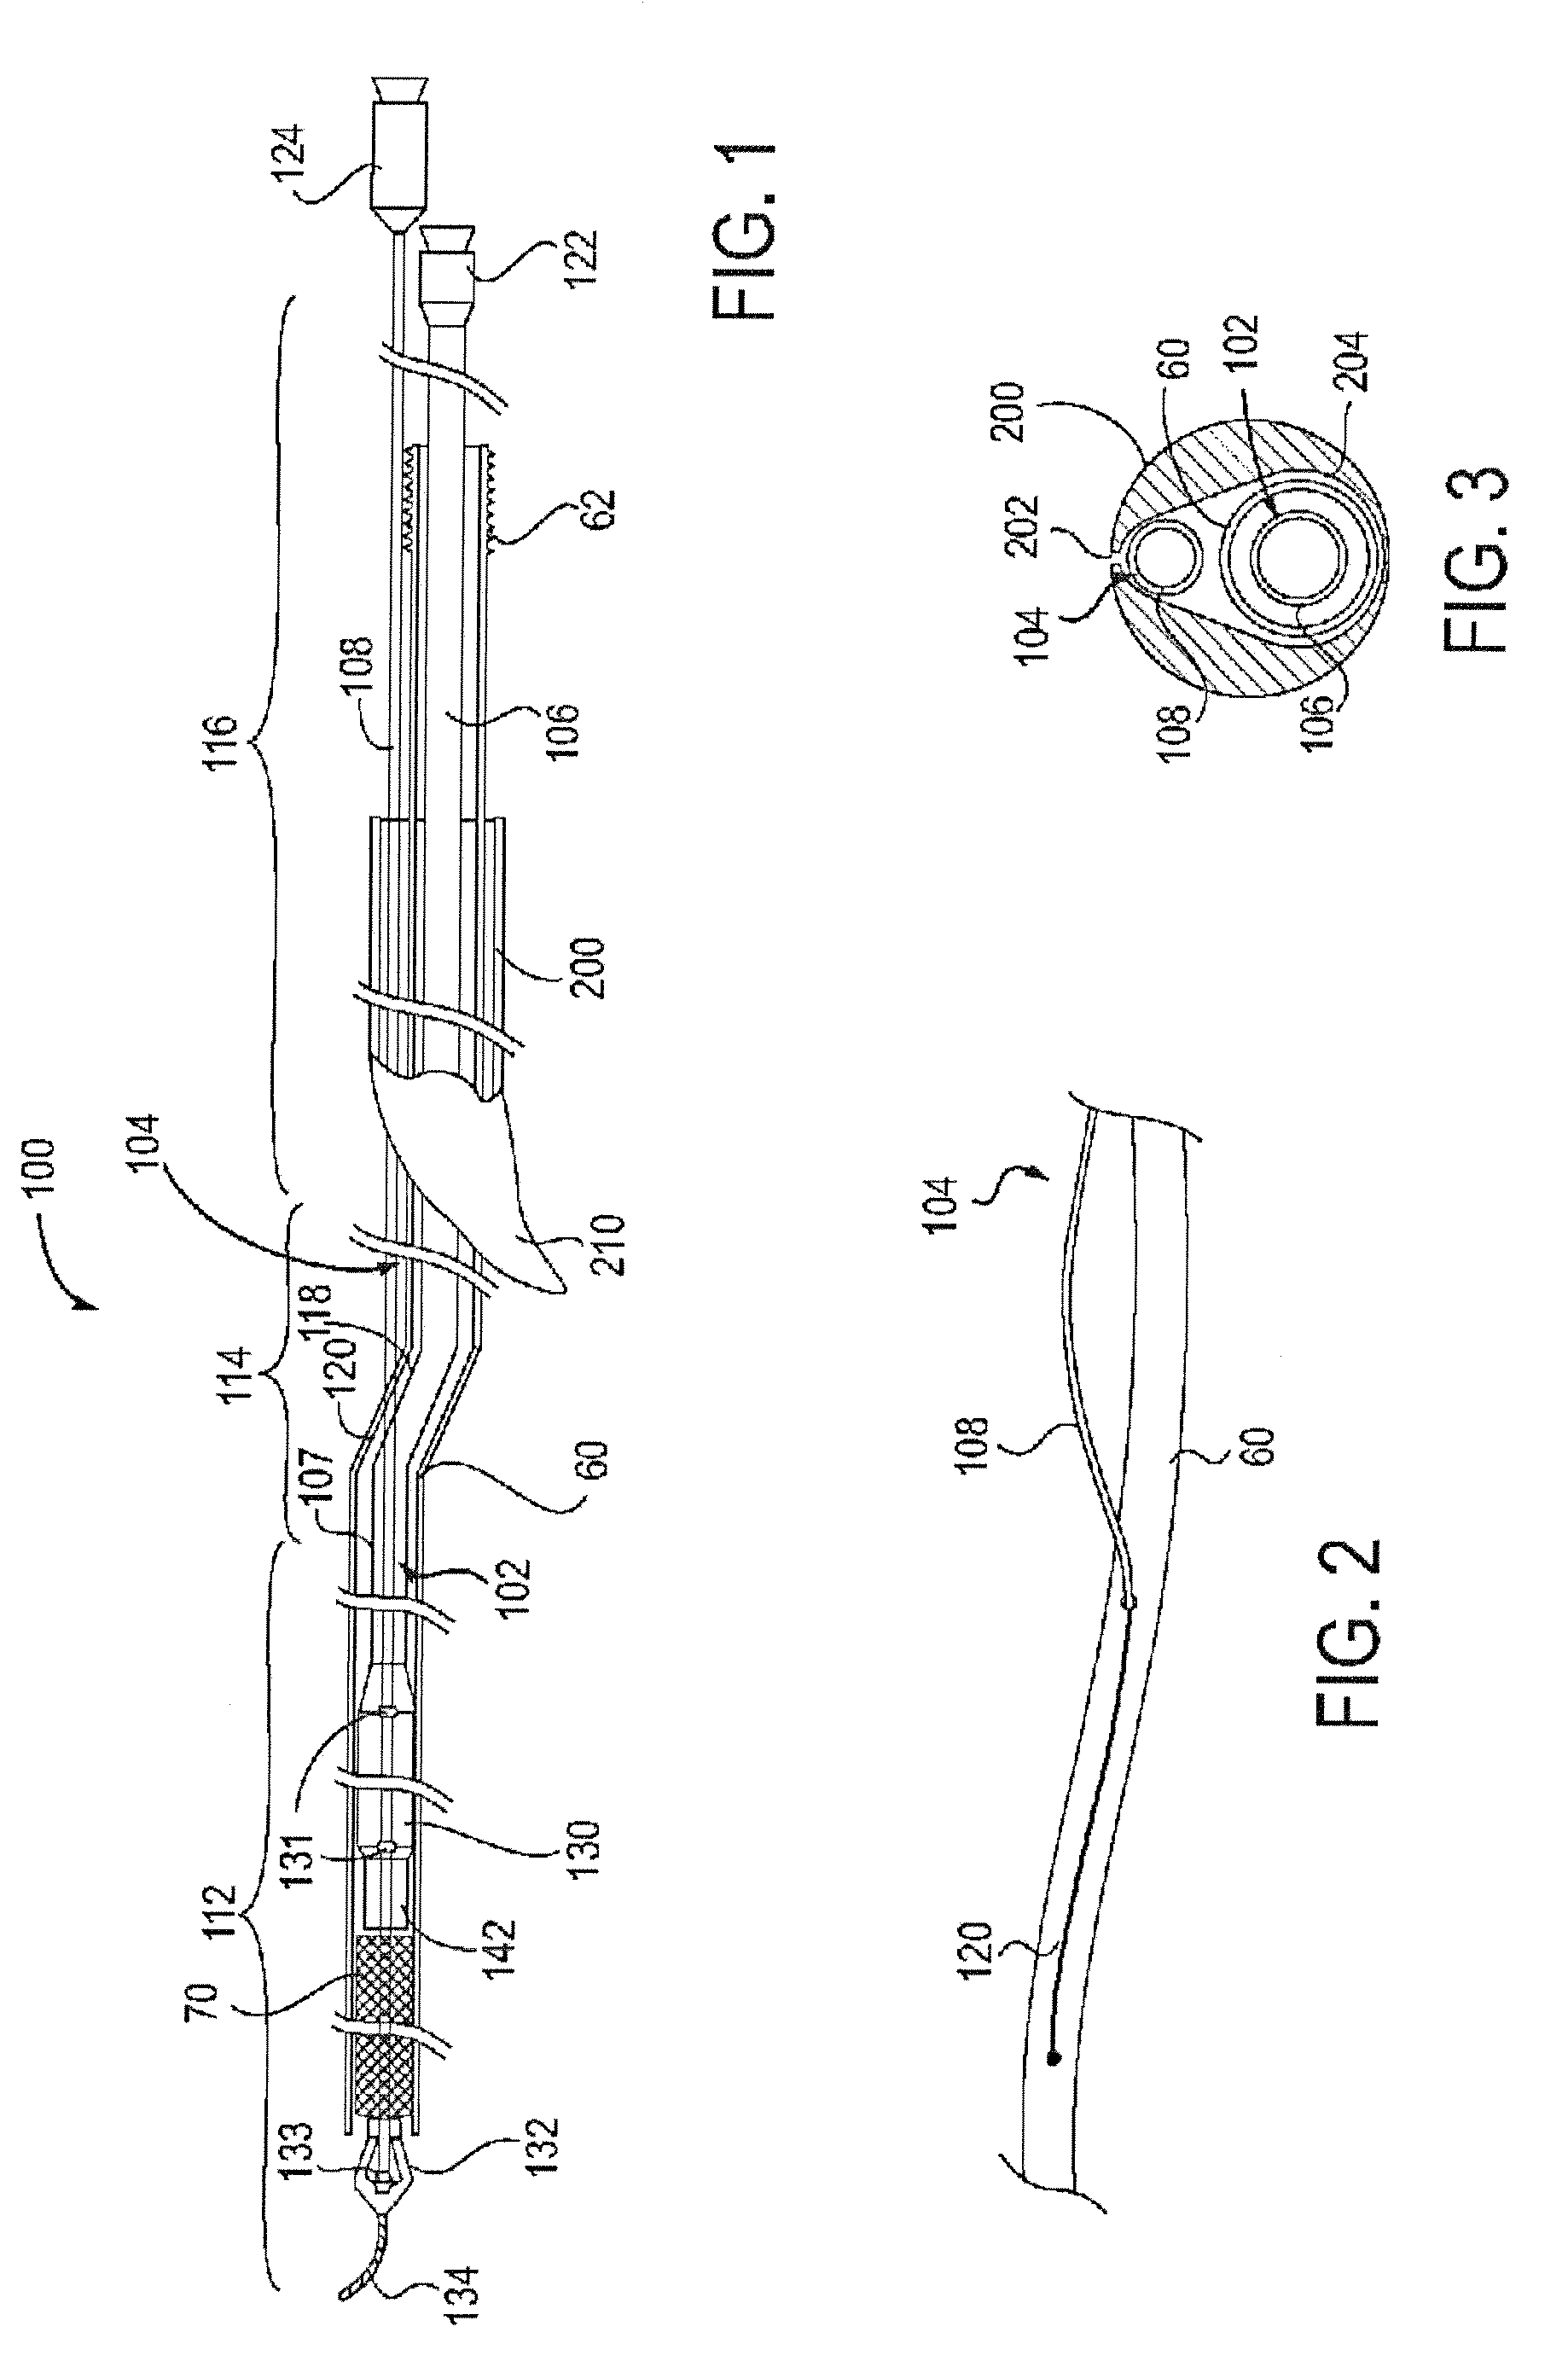 Apparatus and methods for protected angioplasty and stenting at a carotid bifurcation